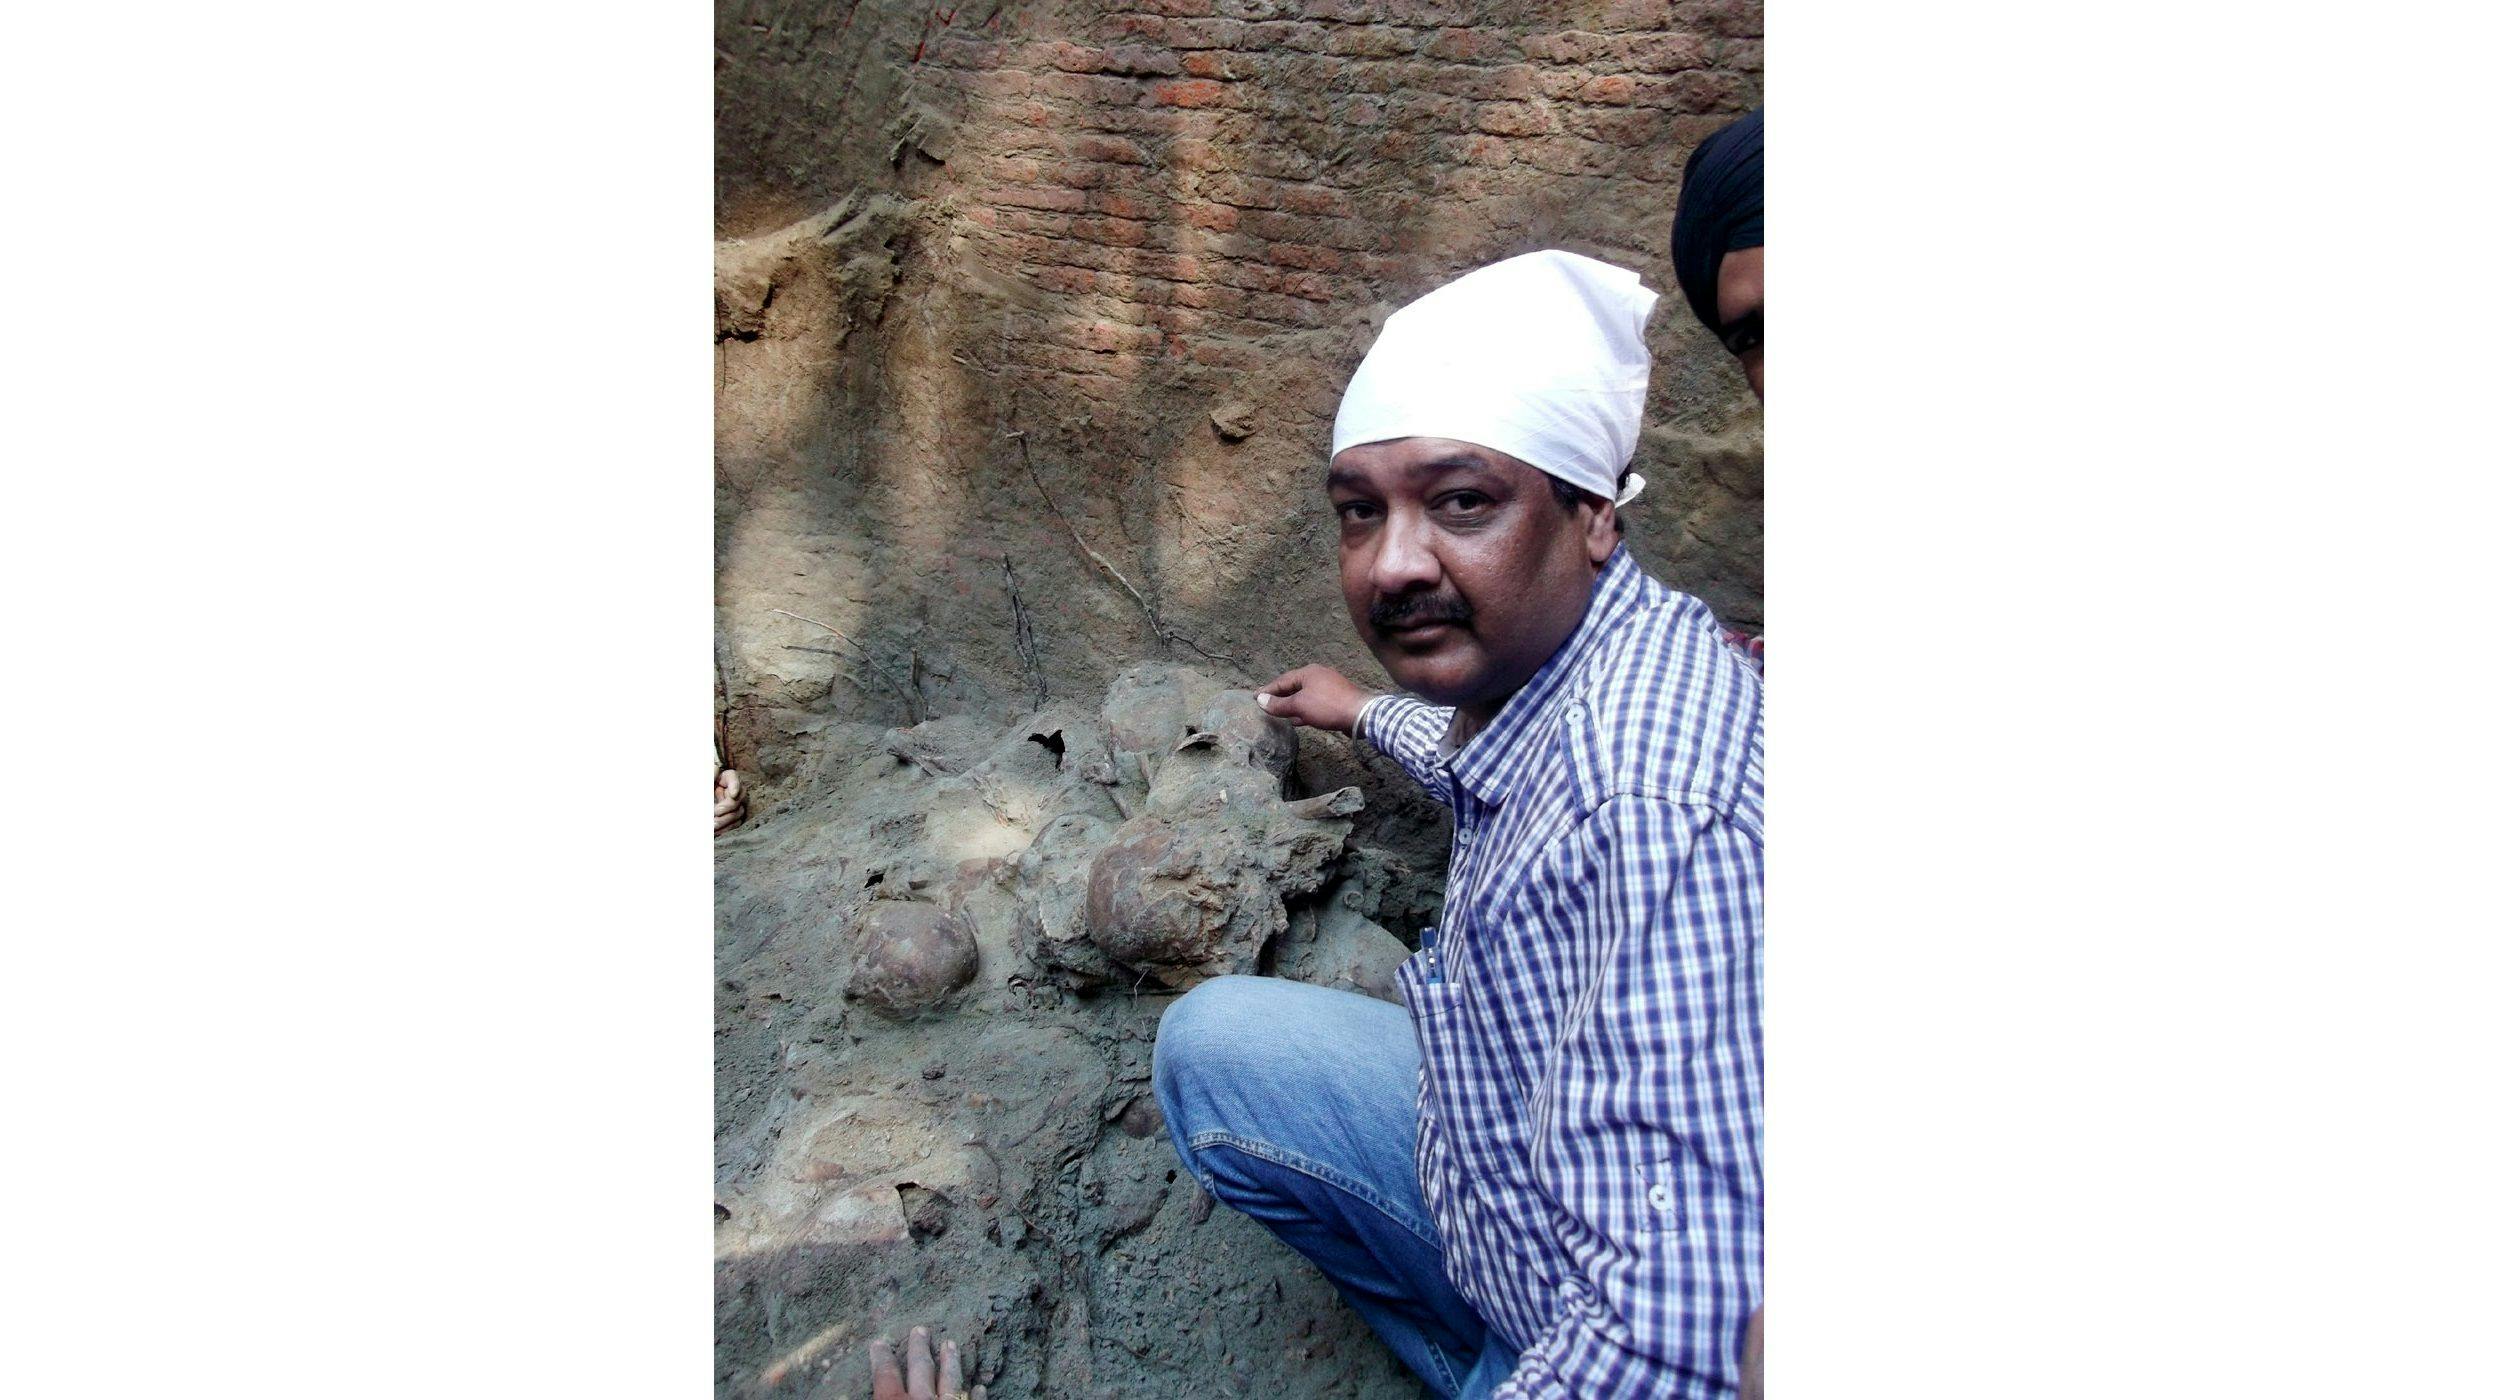 Historian Surinder Kochhar with the findings from the well 